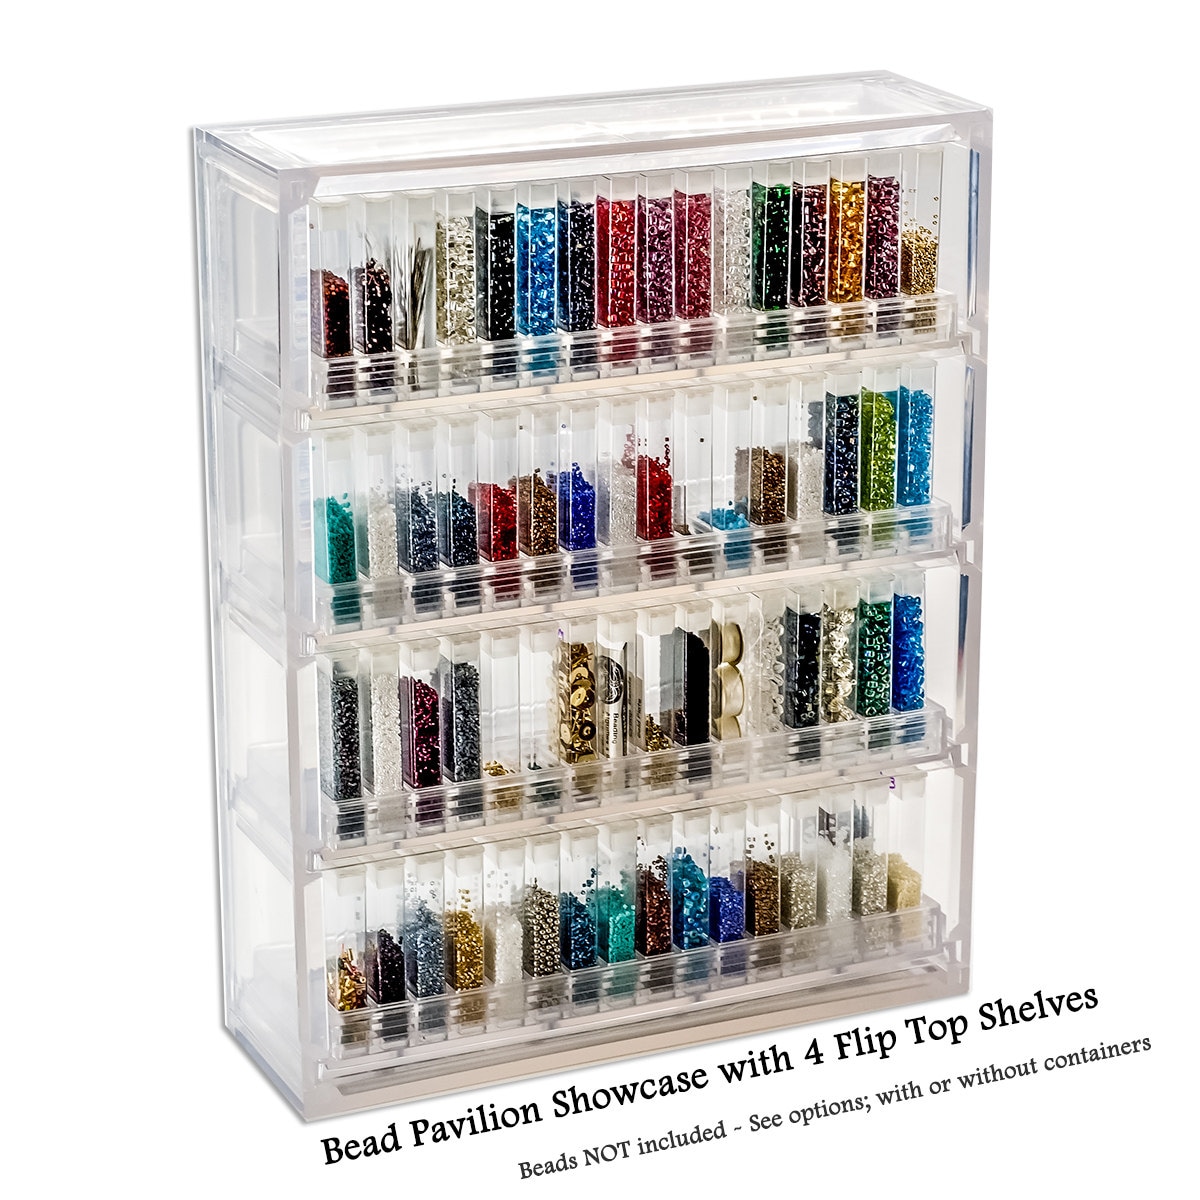 Bead Storage Solution Bead Pavilion Showcase With or Without 4 ROUND  Shelves Bead Organizer, Bead Tower Display, Bead Organization 